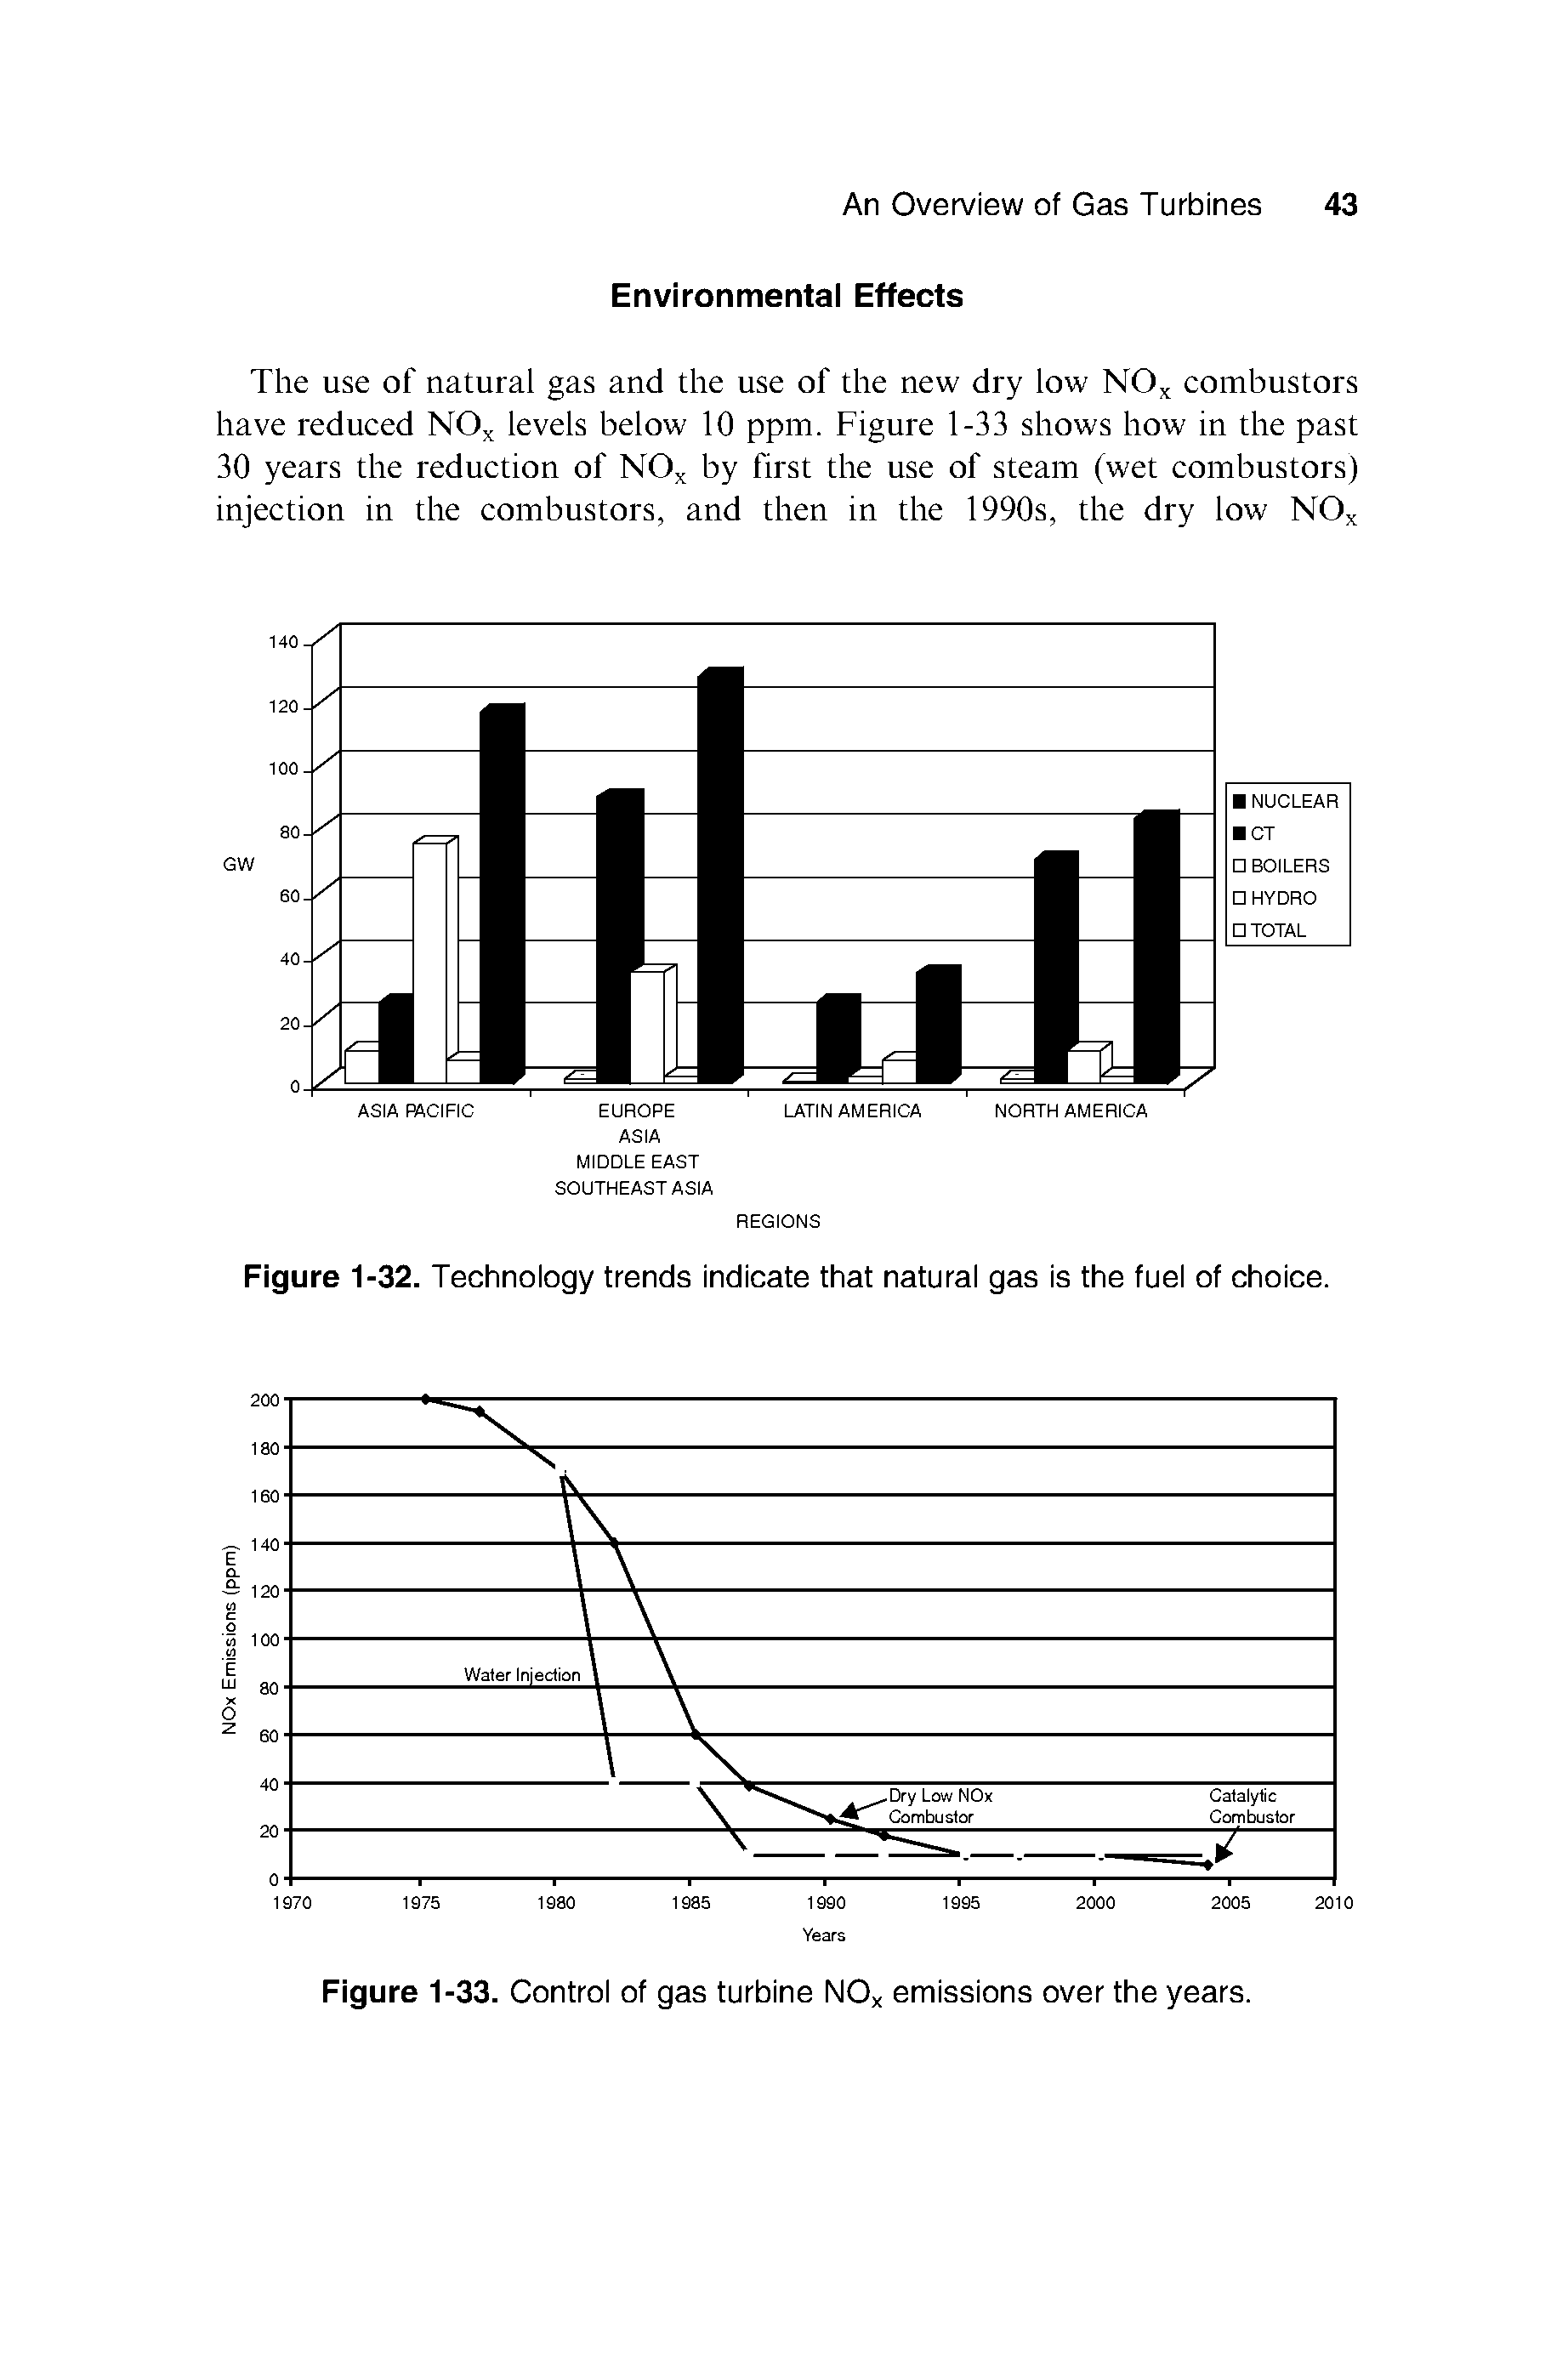 Figure 1-33. Control of gas turbine NOx emissions over the years.